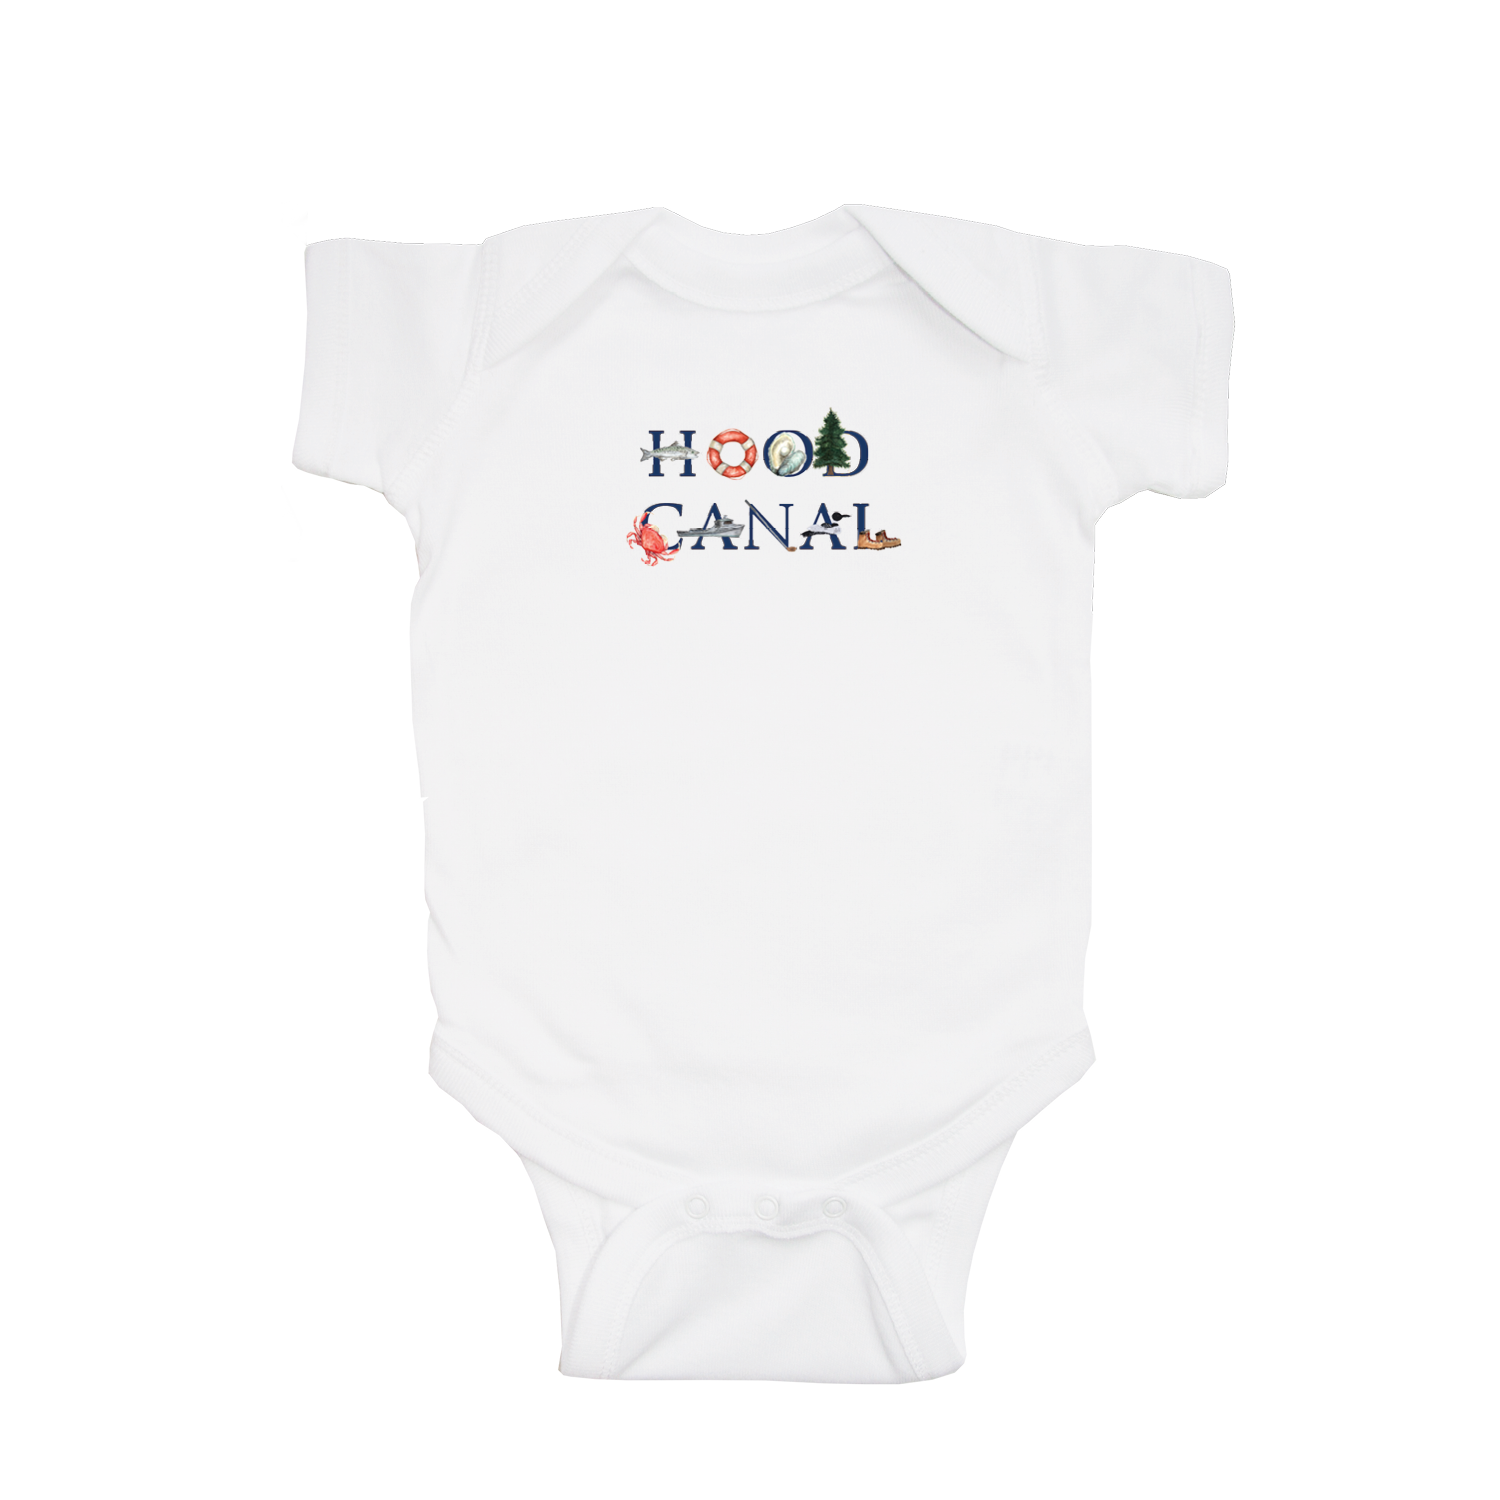 hood canal baby snap up short sleeve